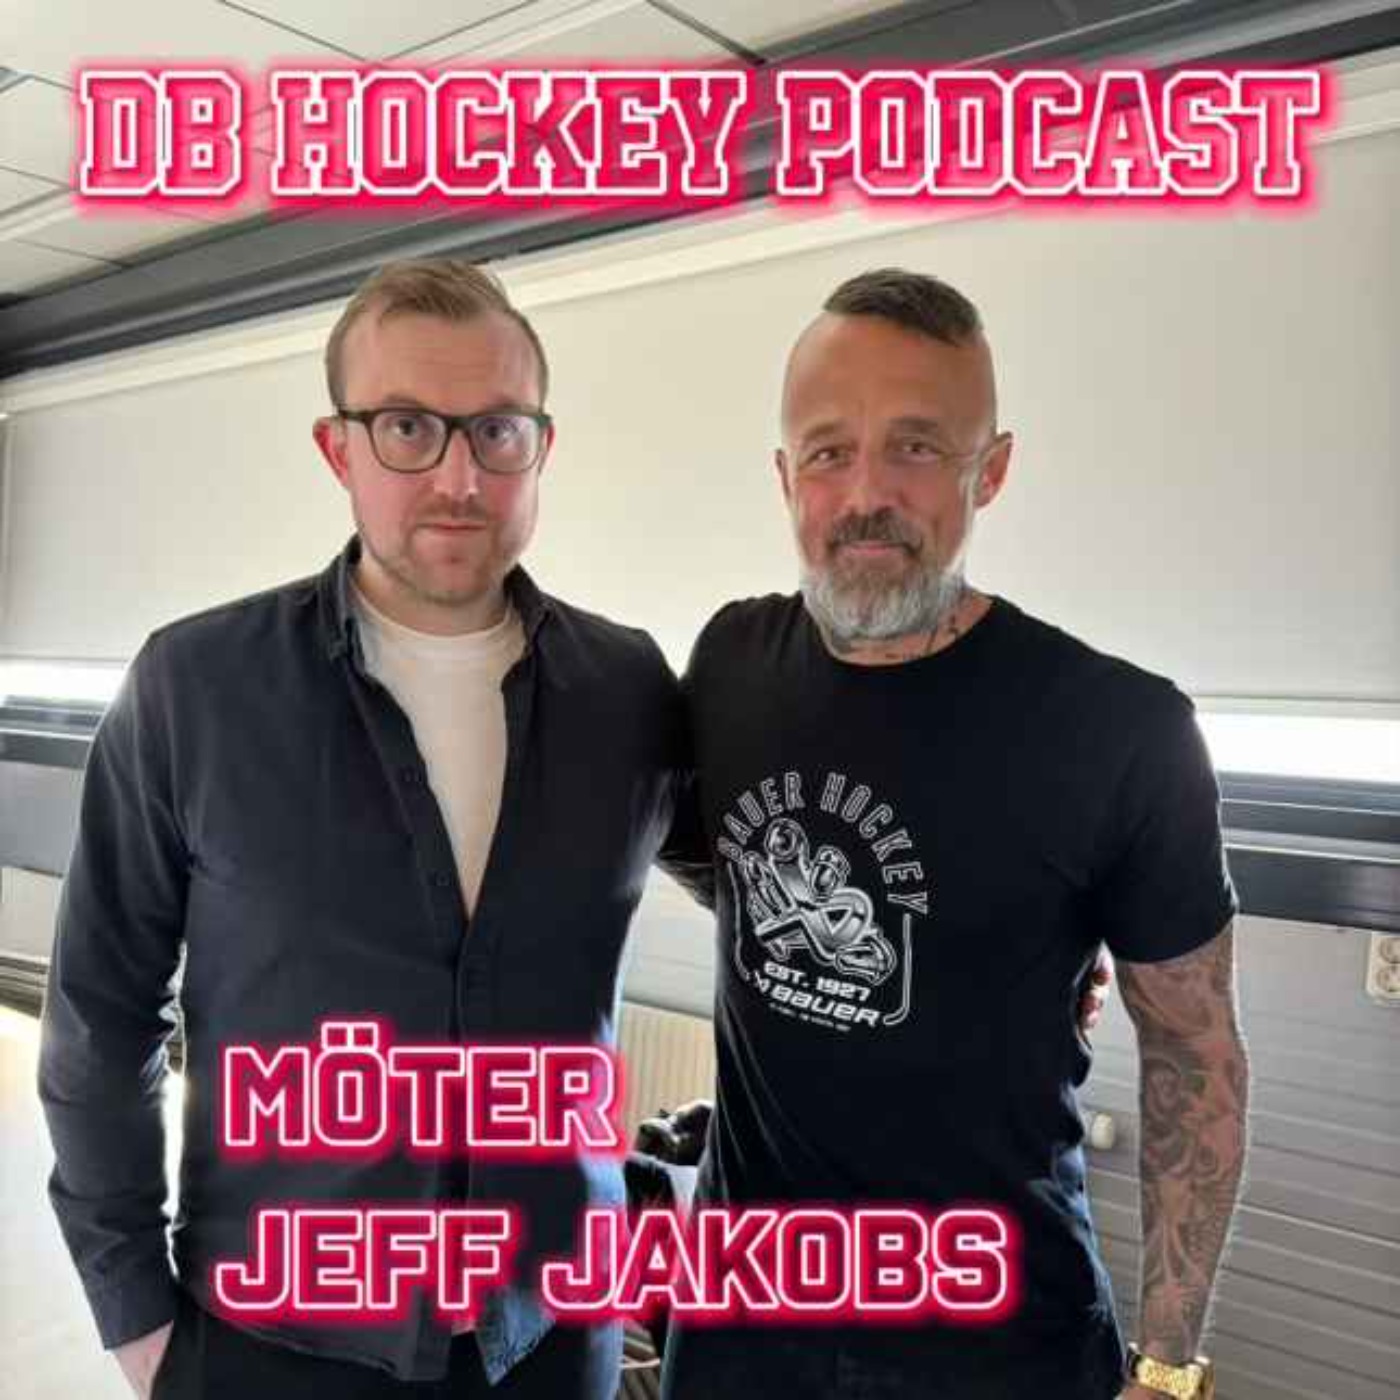 cover art for DB Hockey Podcast möter Jeff Jakobs